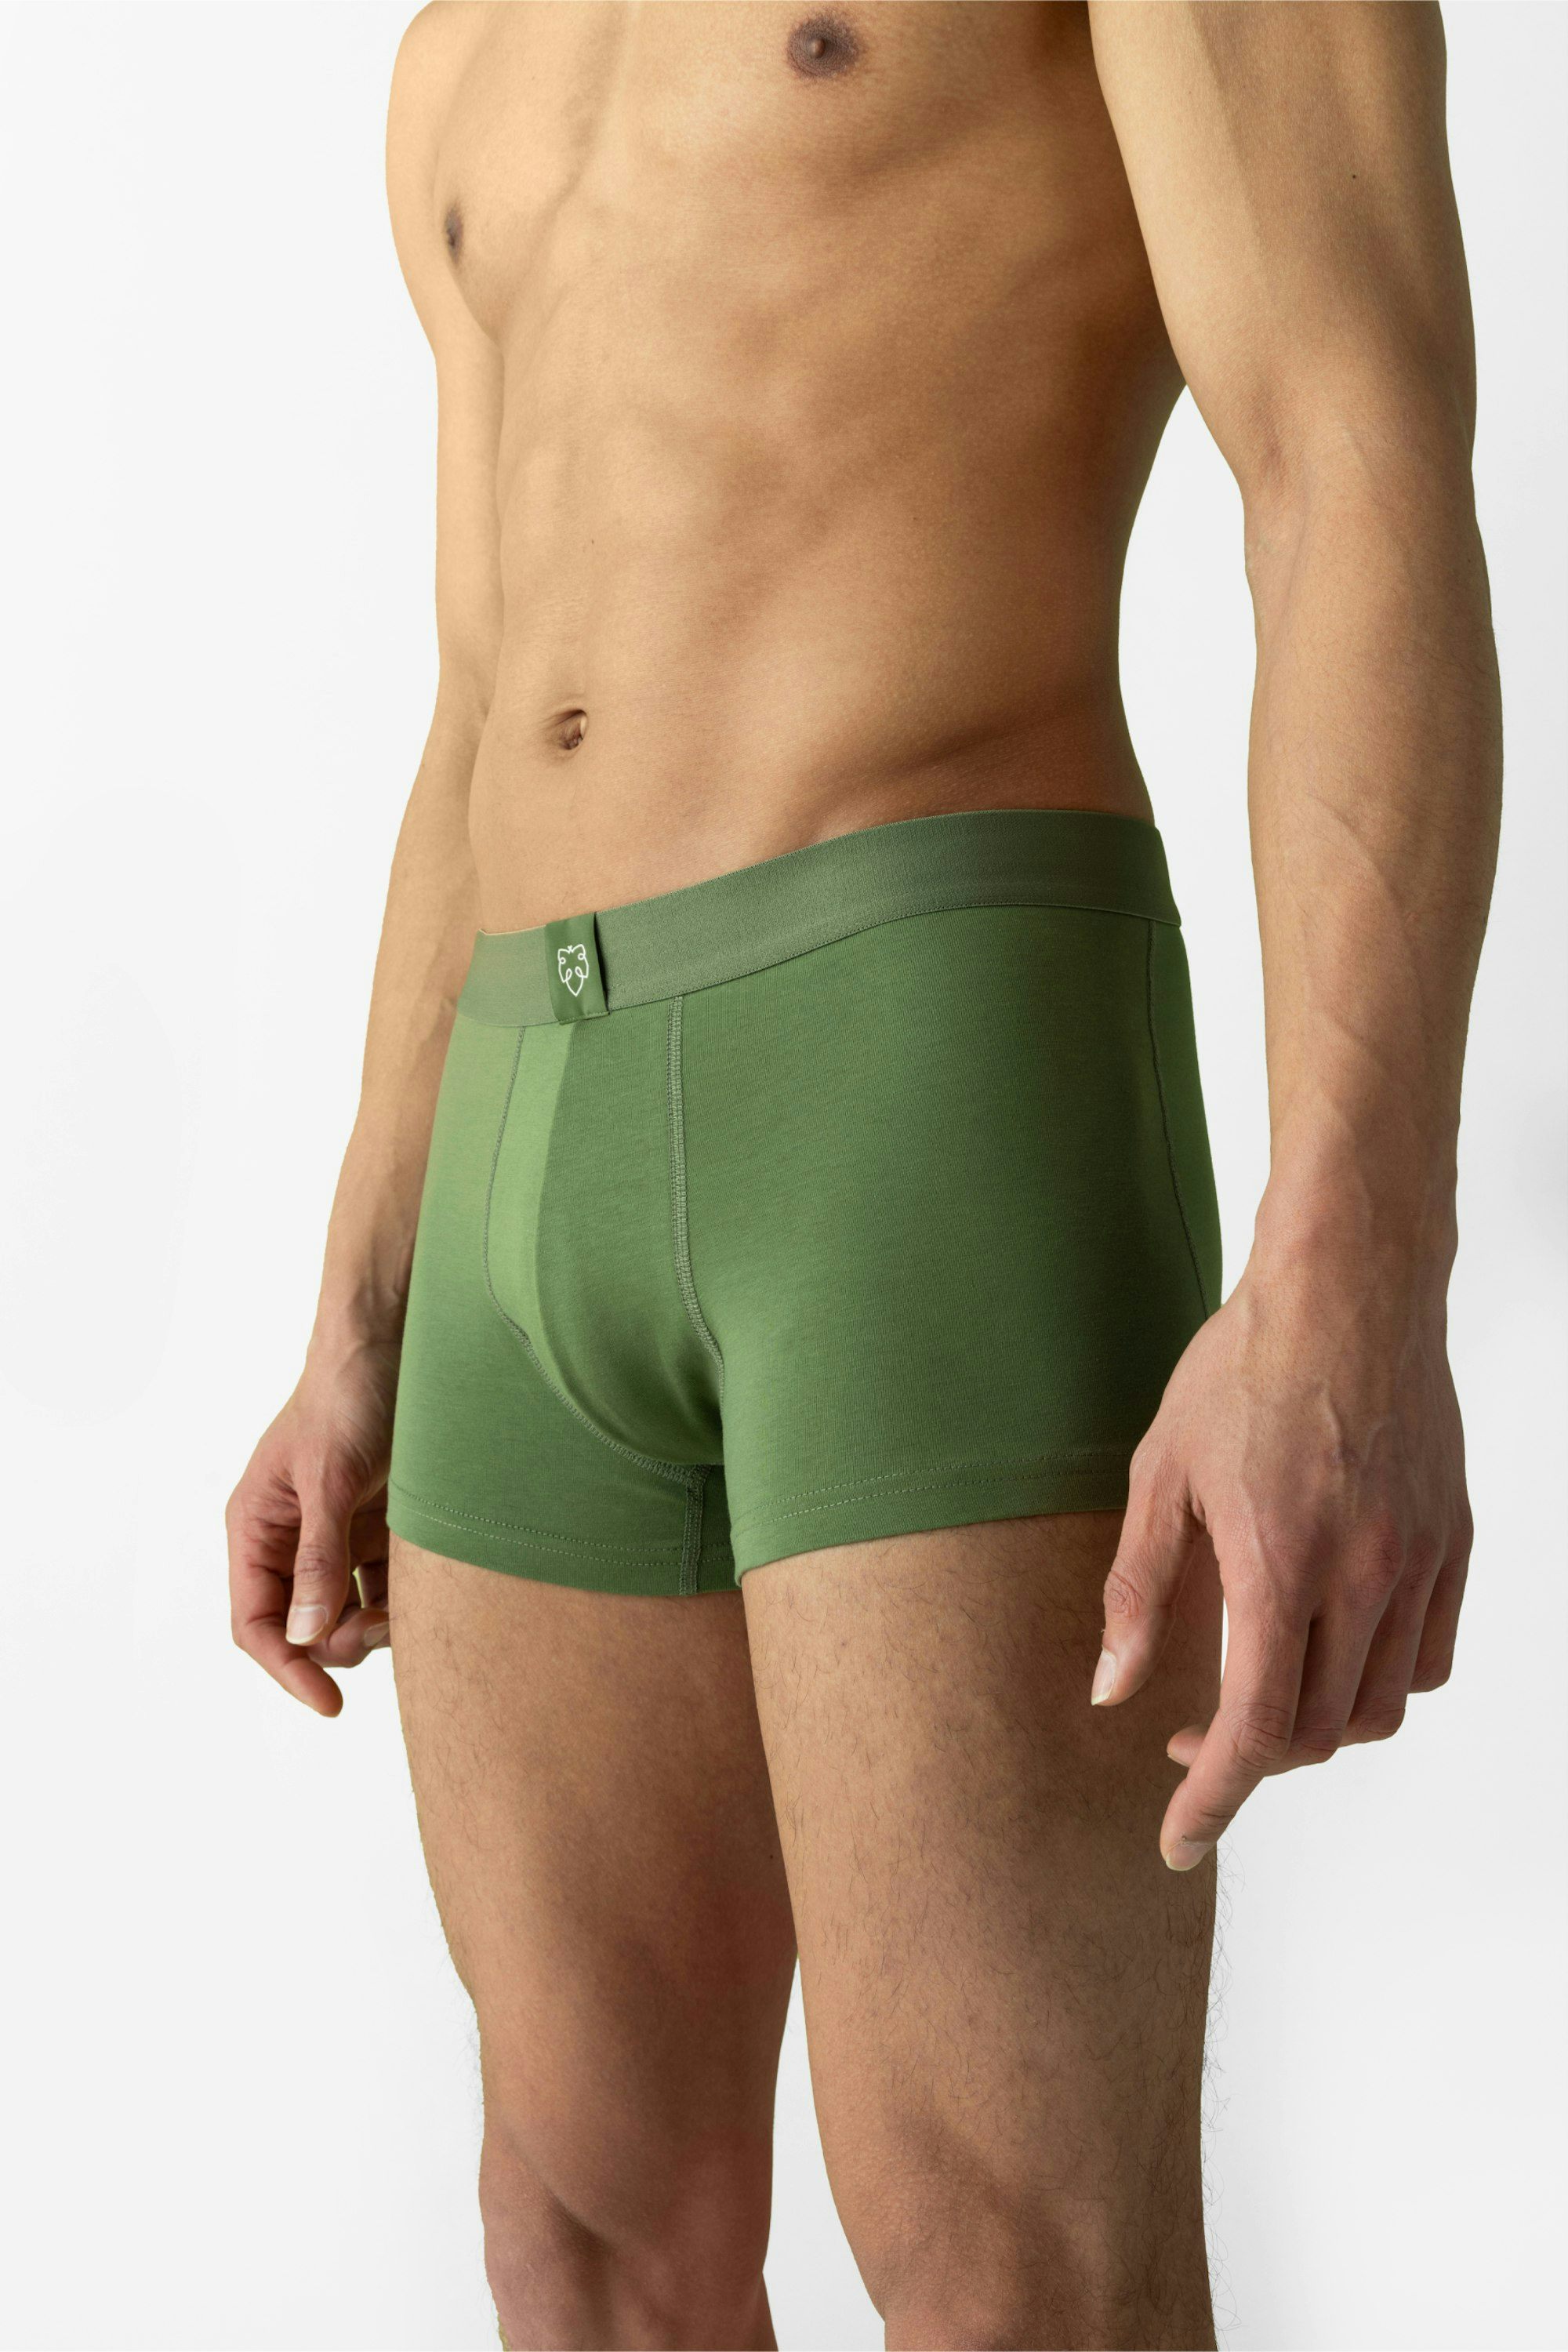 9xSolid Green Trunks